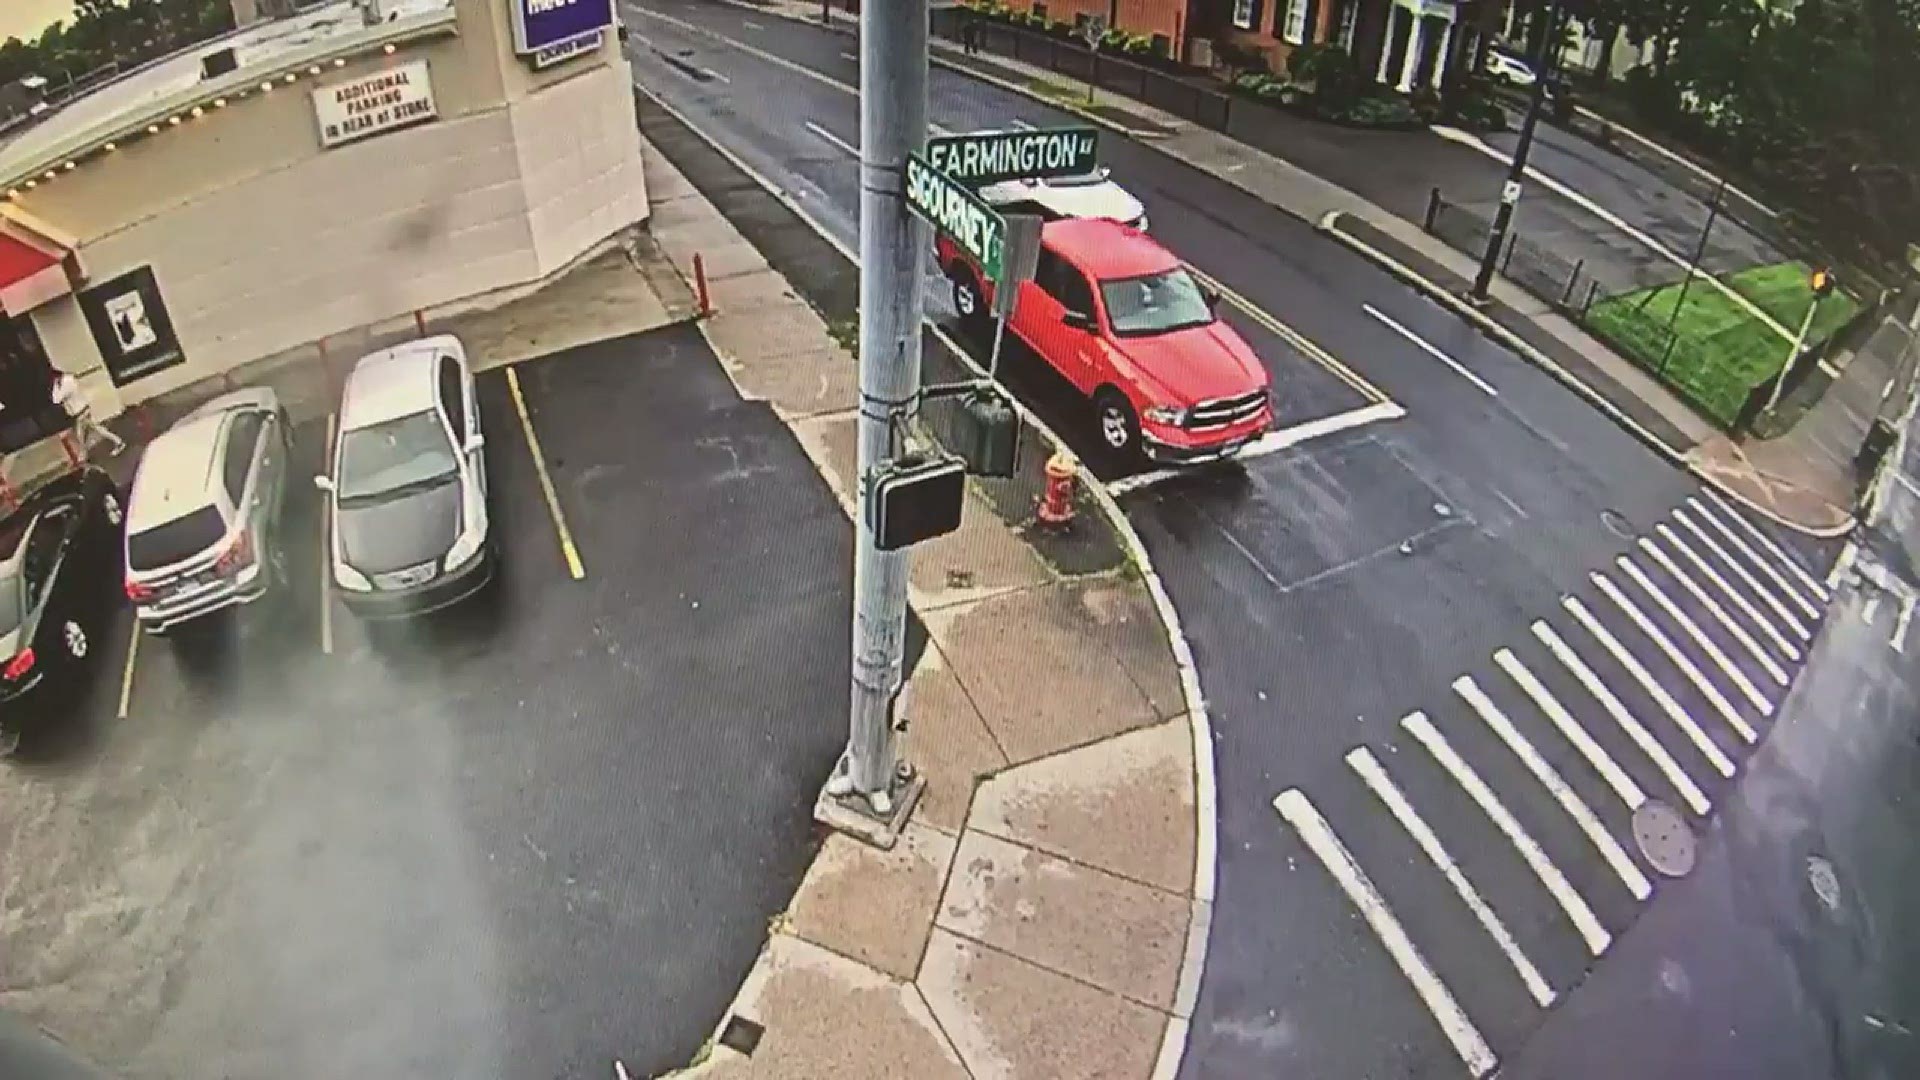 Police are searching for the people who ran from a stolen car crash in Hartford Monday.